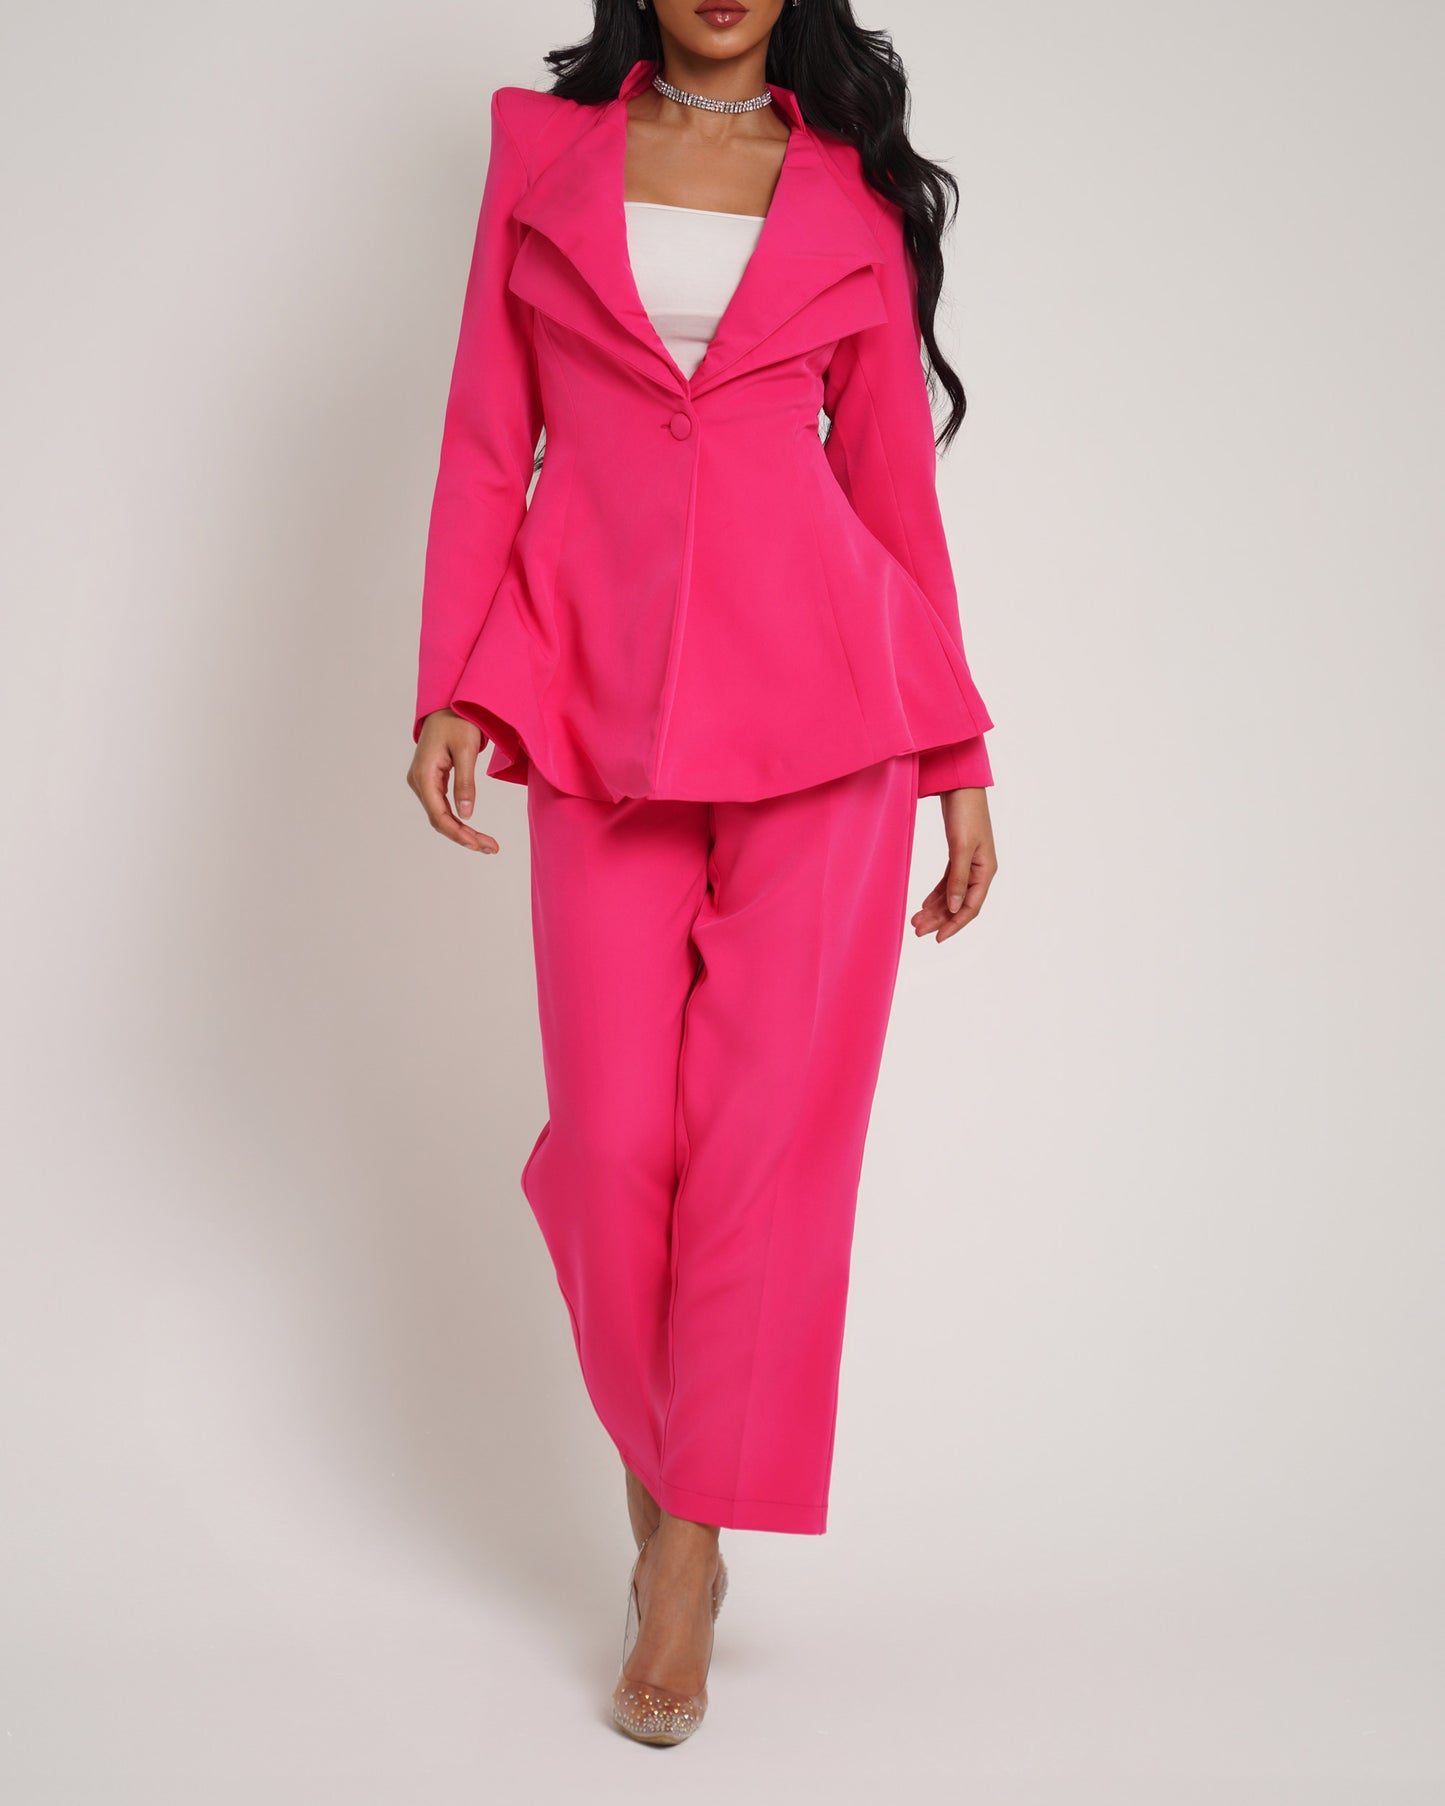 Deep pink pointed shoulder double collar blazer paired with straight leg trousers